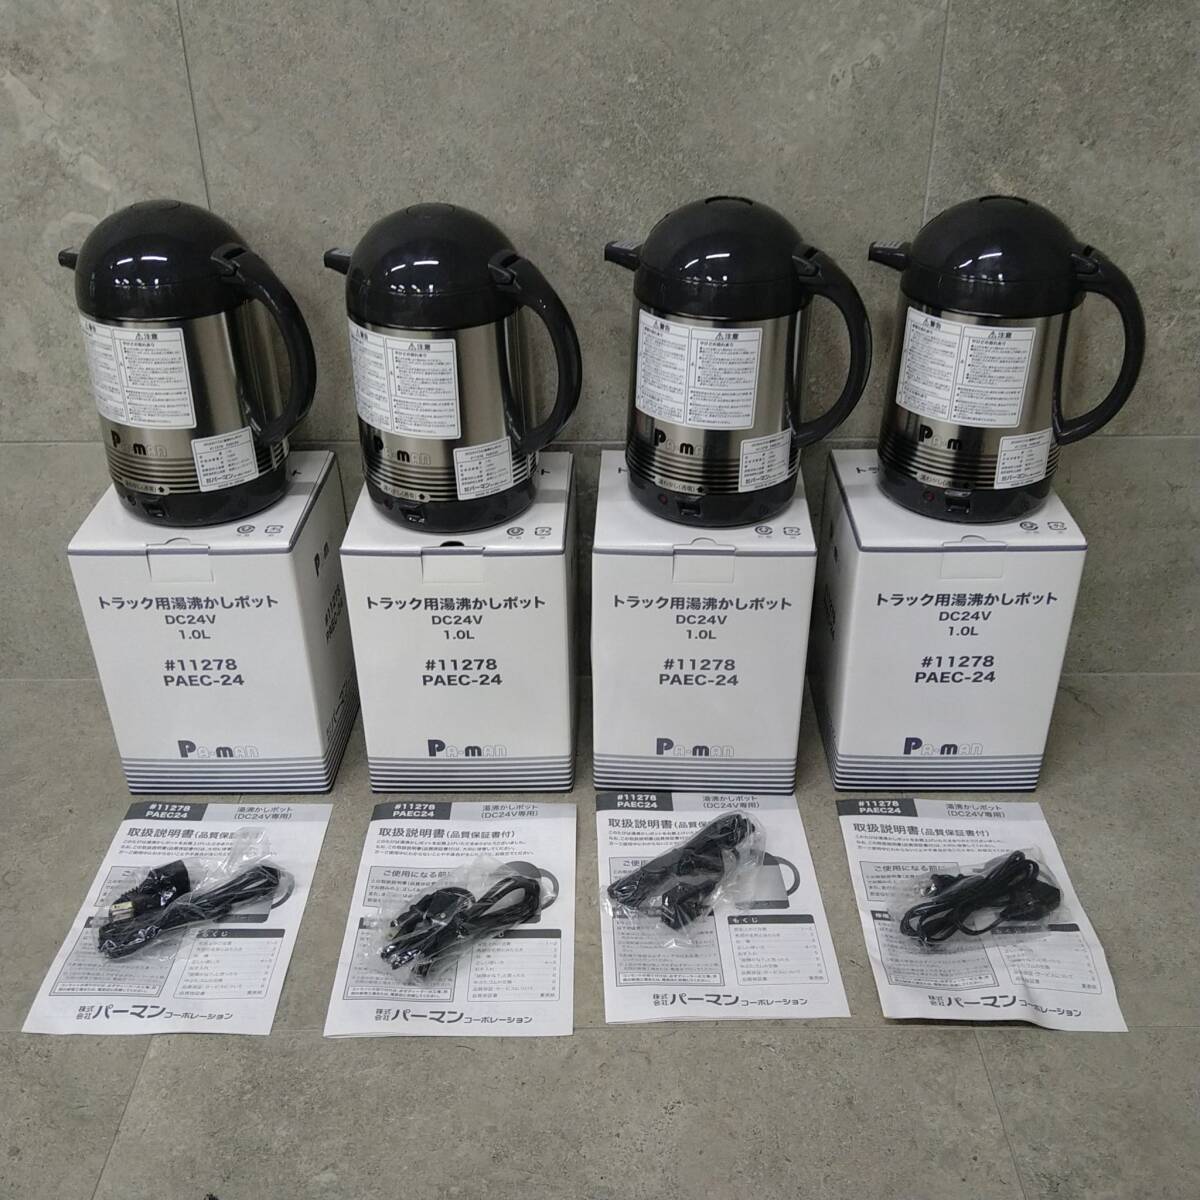 F1336(054)-701/TM12000 perm nDC24V exclusive use hot water .. pot 1.0L #11278 PAEC24 4 piece summarize for truck pot car kettle PA-MAN